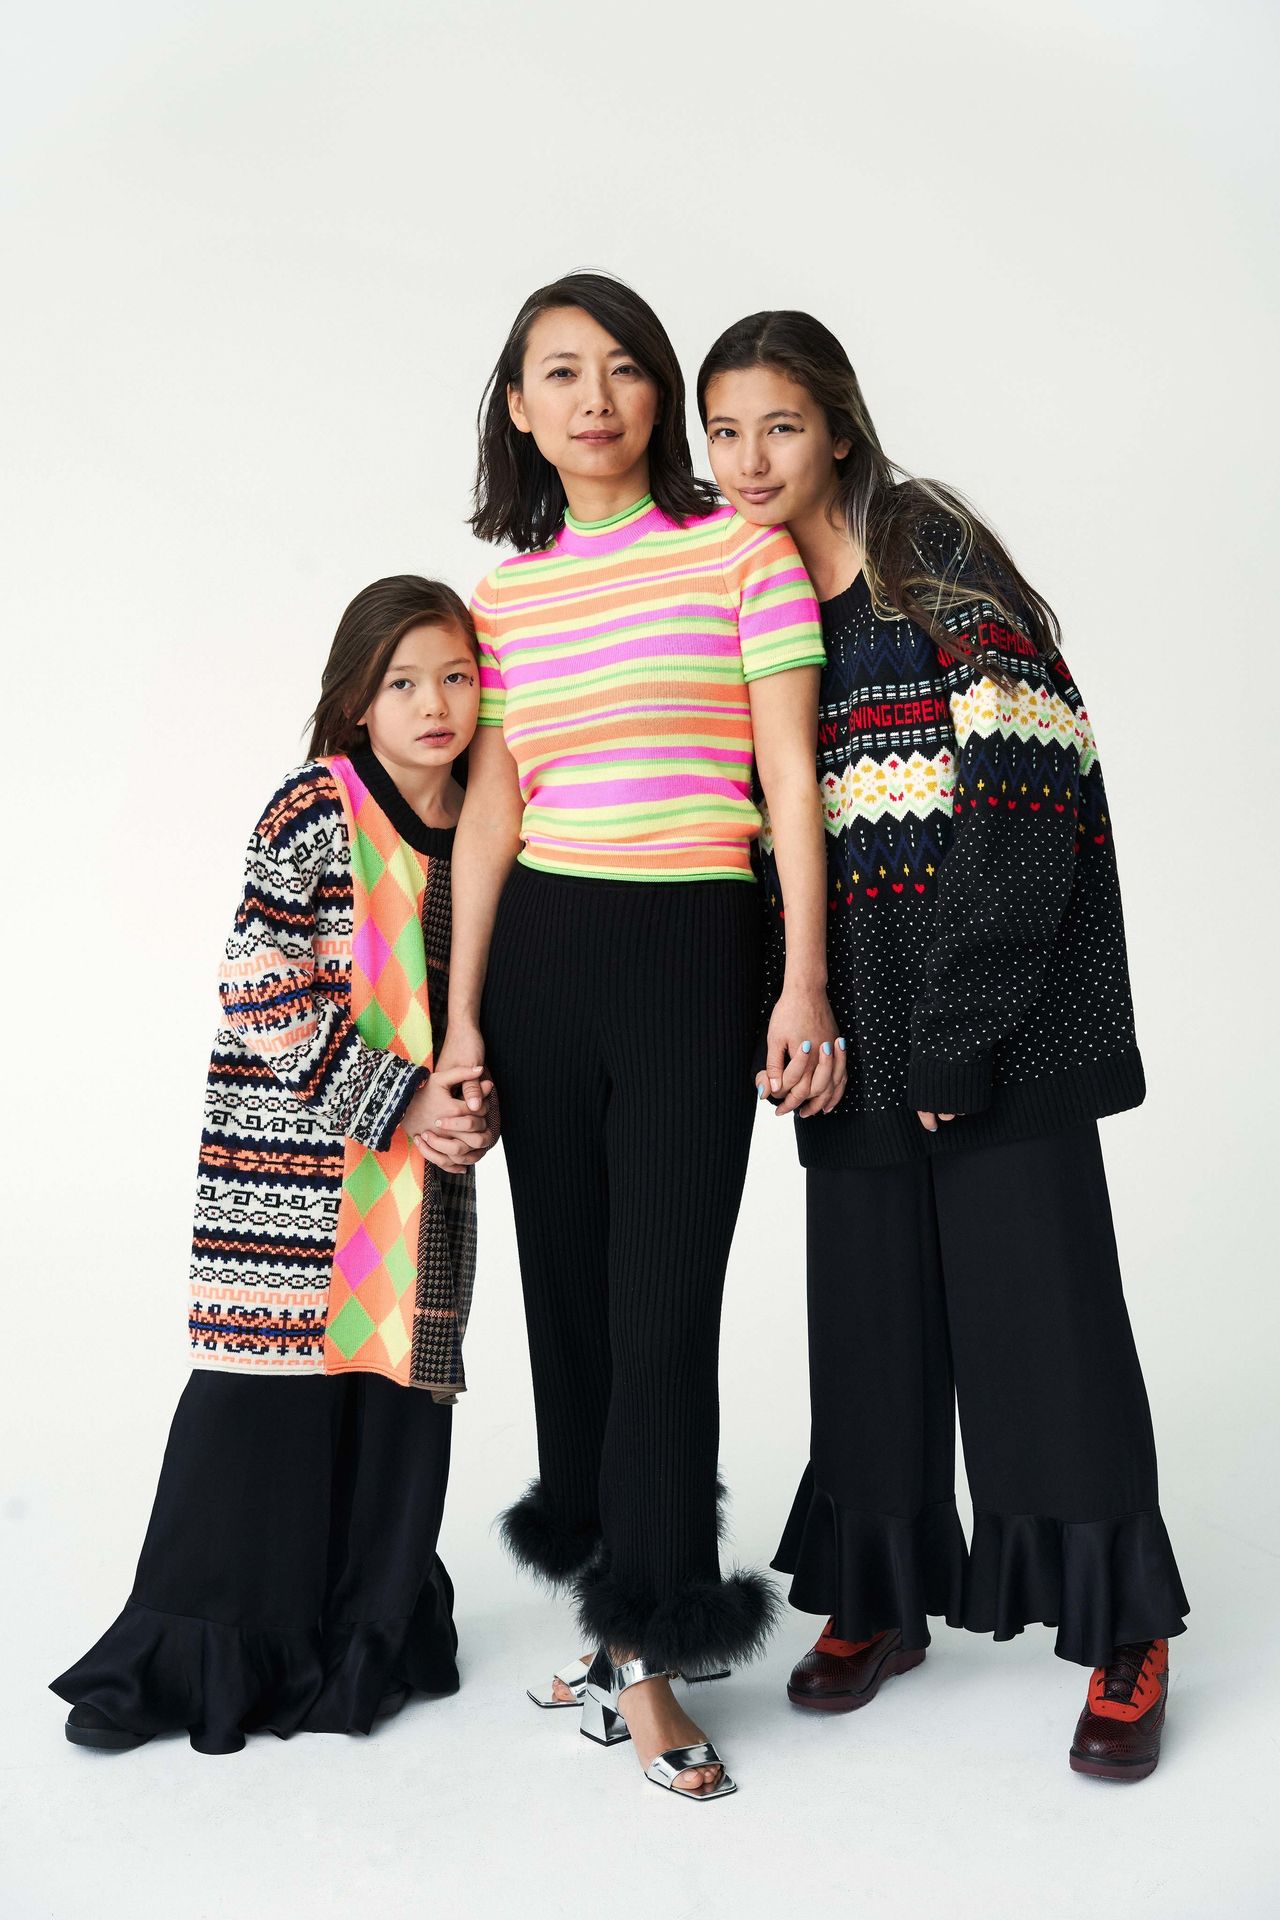 Jing Liu (architect, founder of design firm SO-IL), with her daughters Amalia and Francis